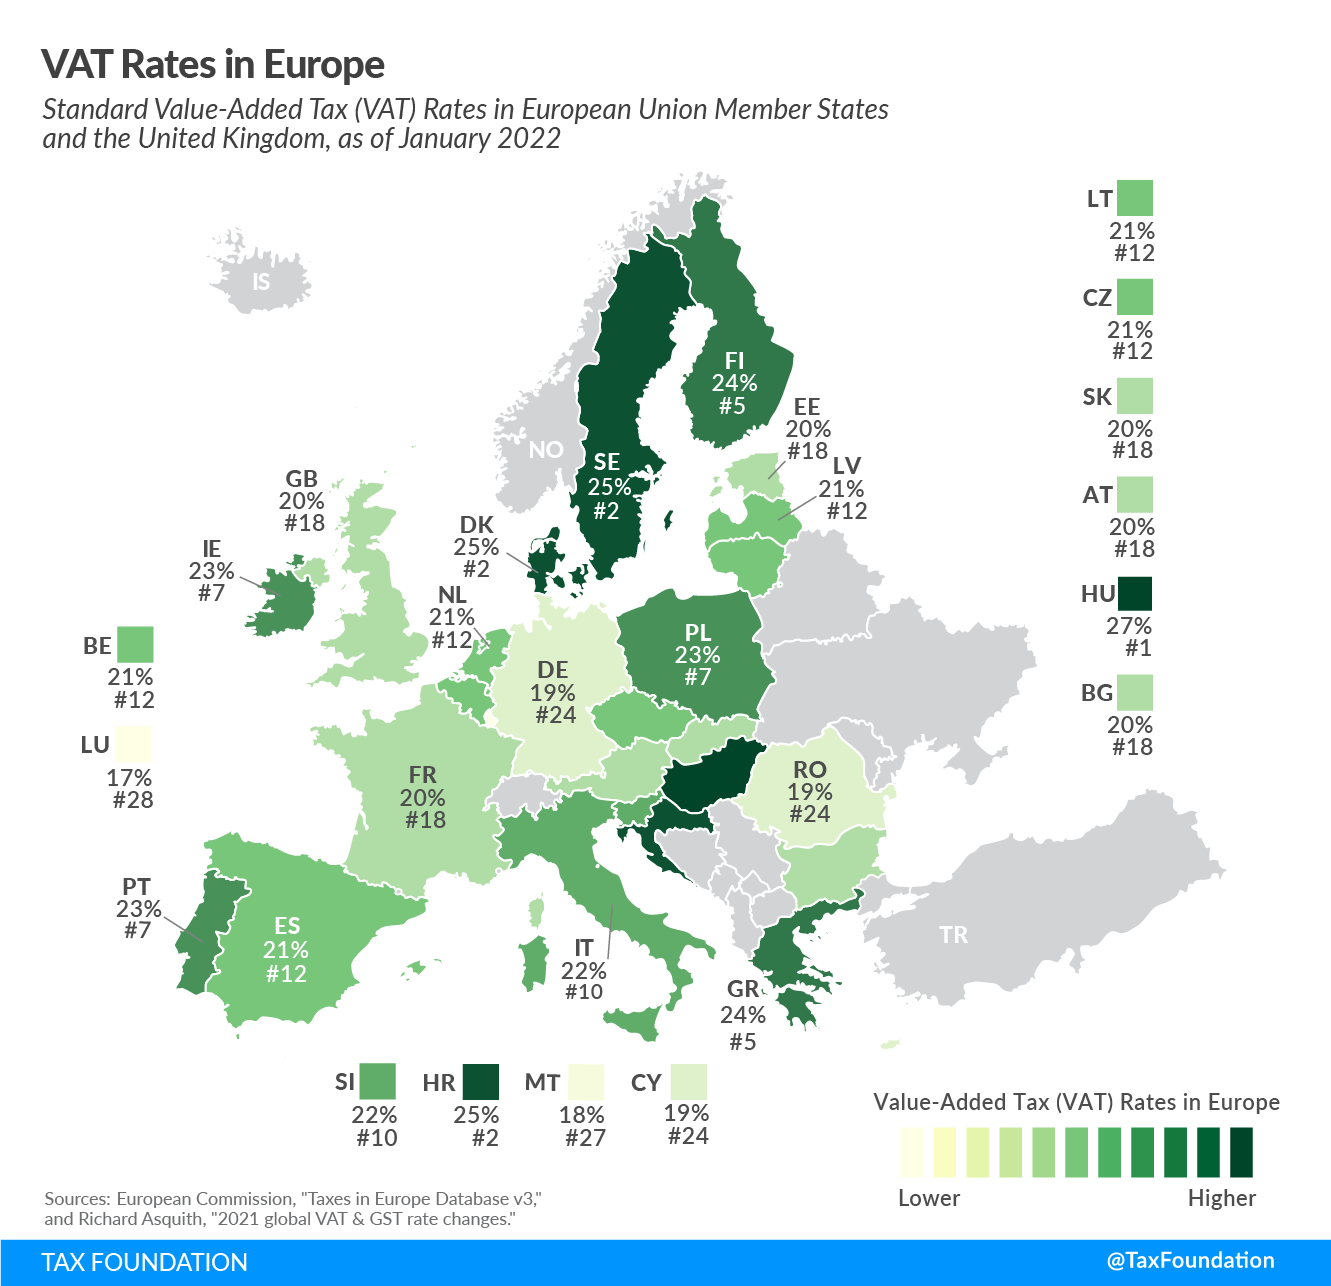 2022 VAT rates in Europe, 2022 VAT rates by country, 2022 value-added tax rates in Europe and 2022 value-added tax rates by country